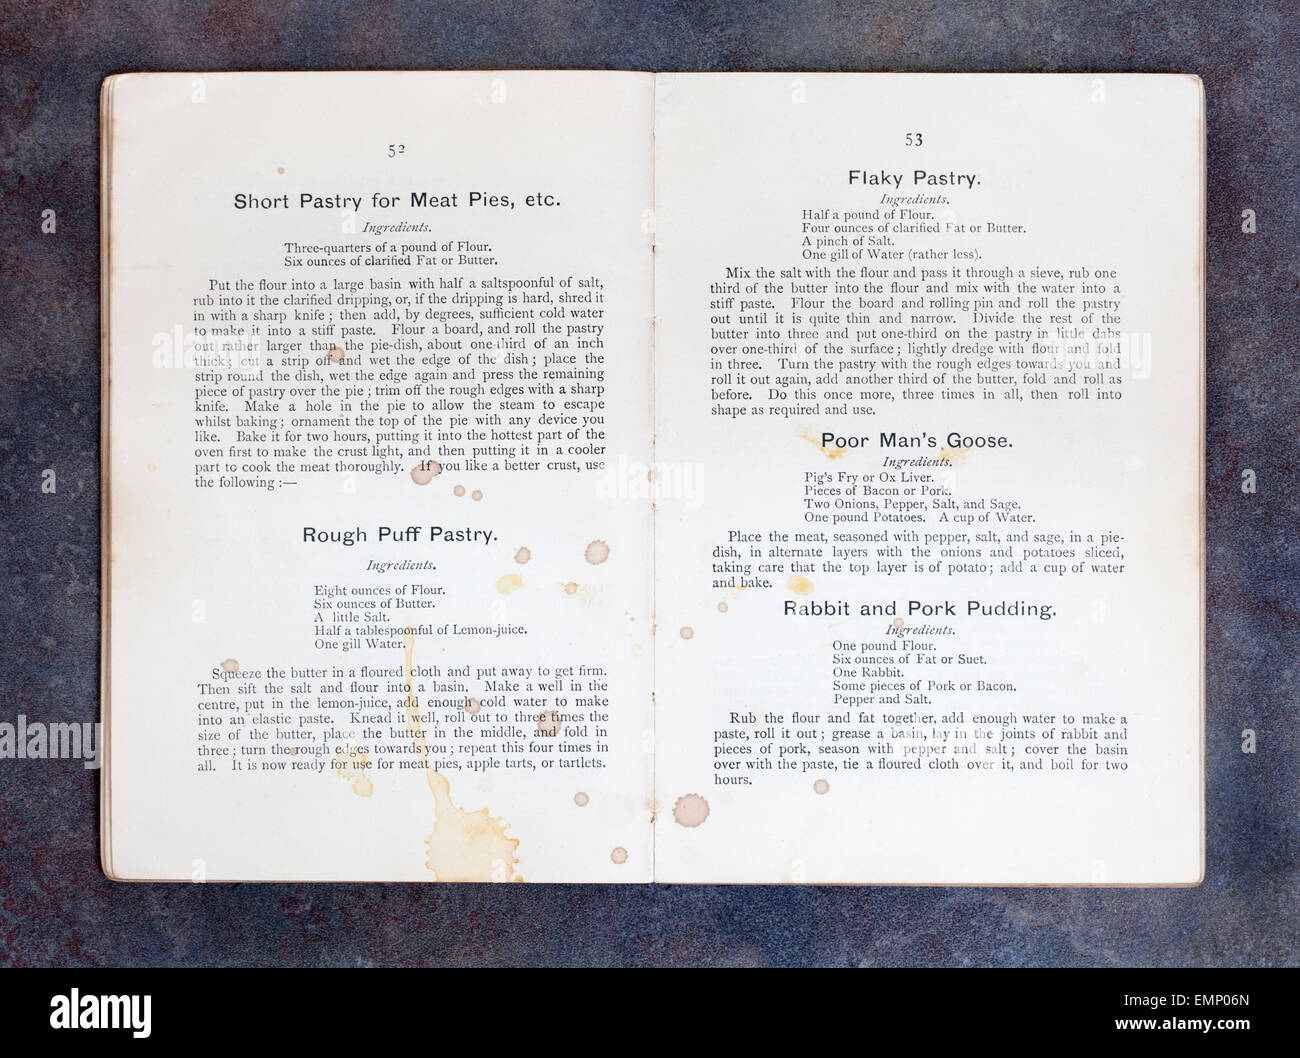 Plain Cookery Recipes - The Official Handbook of The National Training School of Cookery by Mrs Charles Clarke Stock Photo